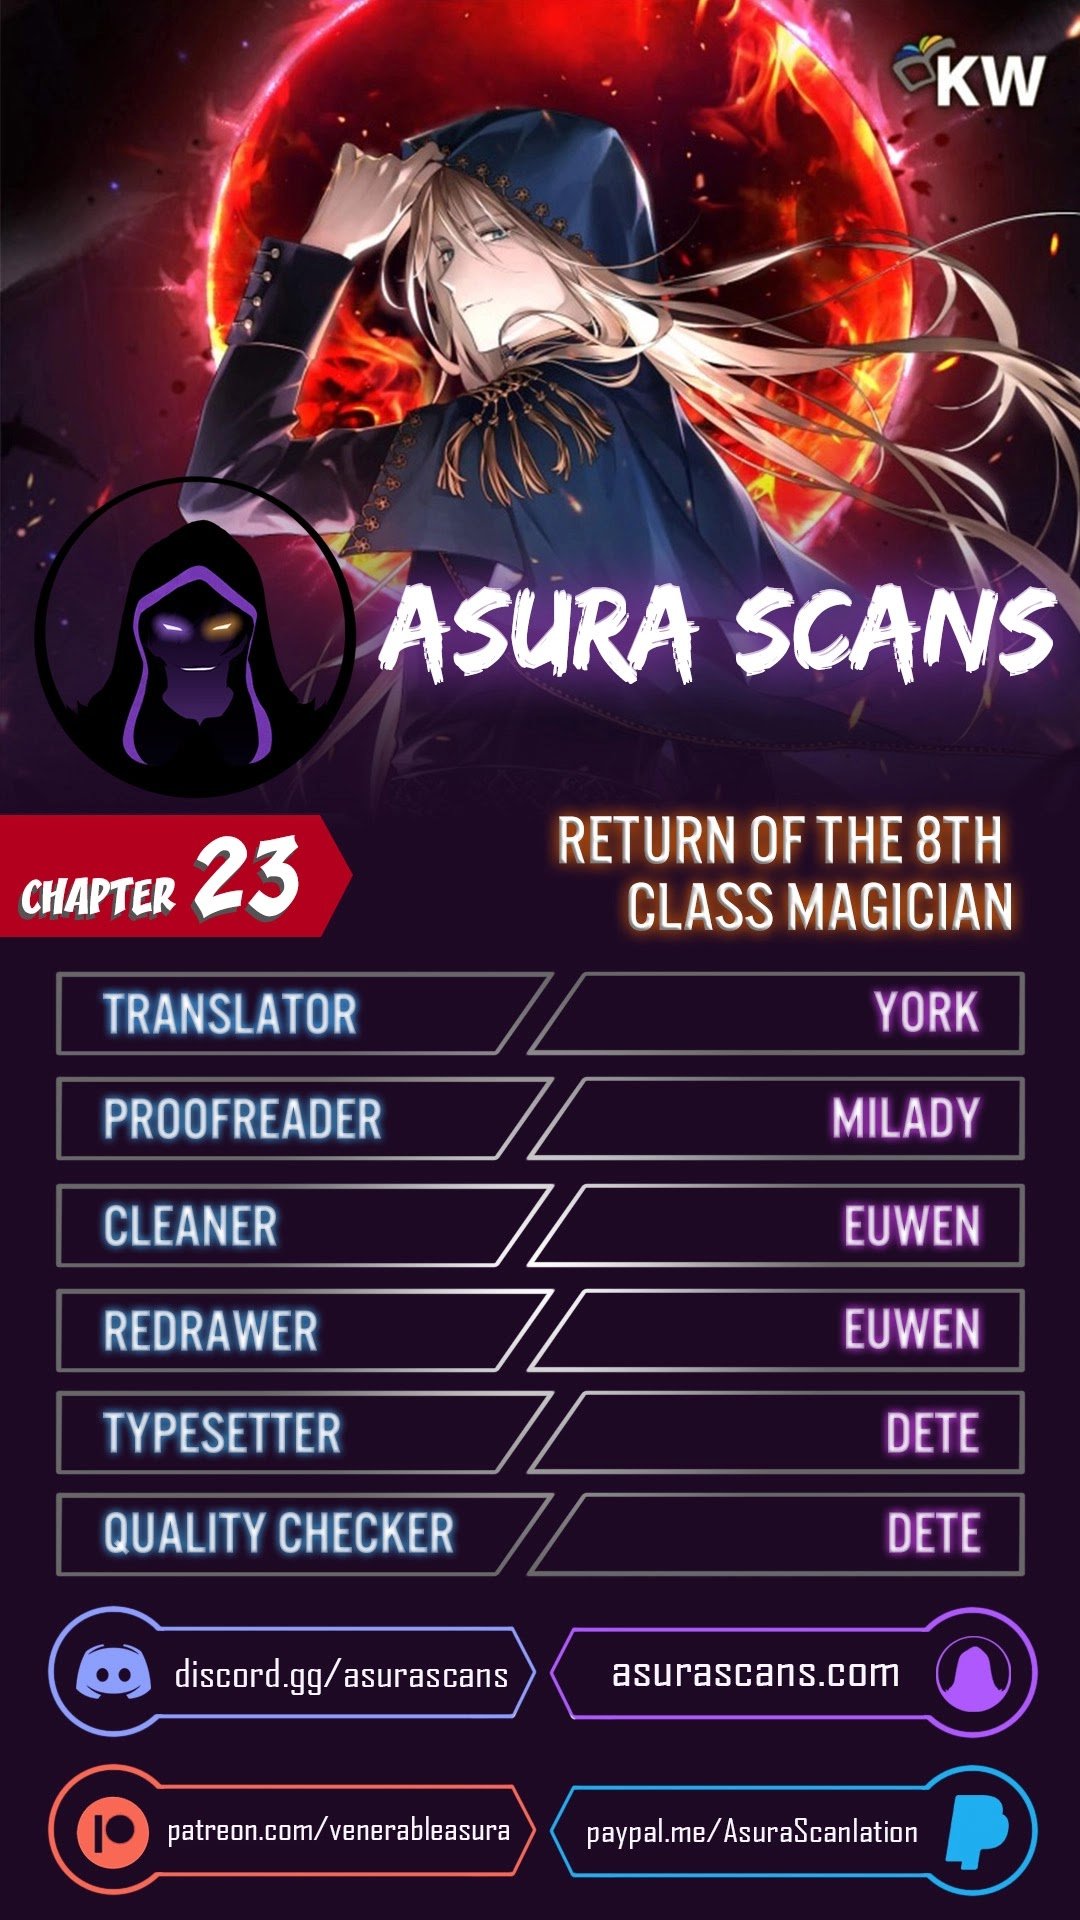 Return of the 8th class Magician chapter 23